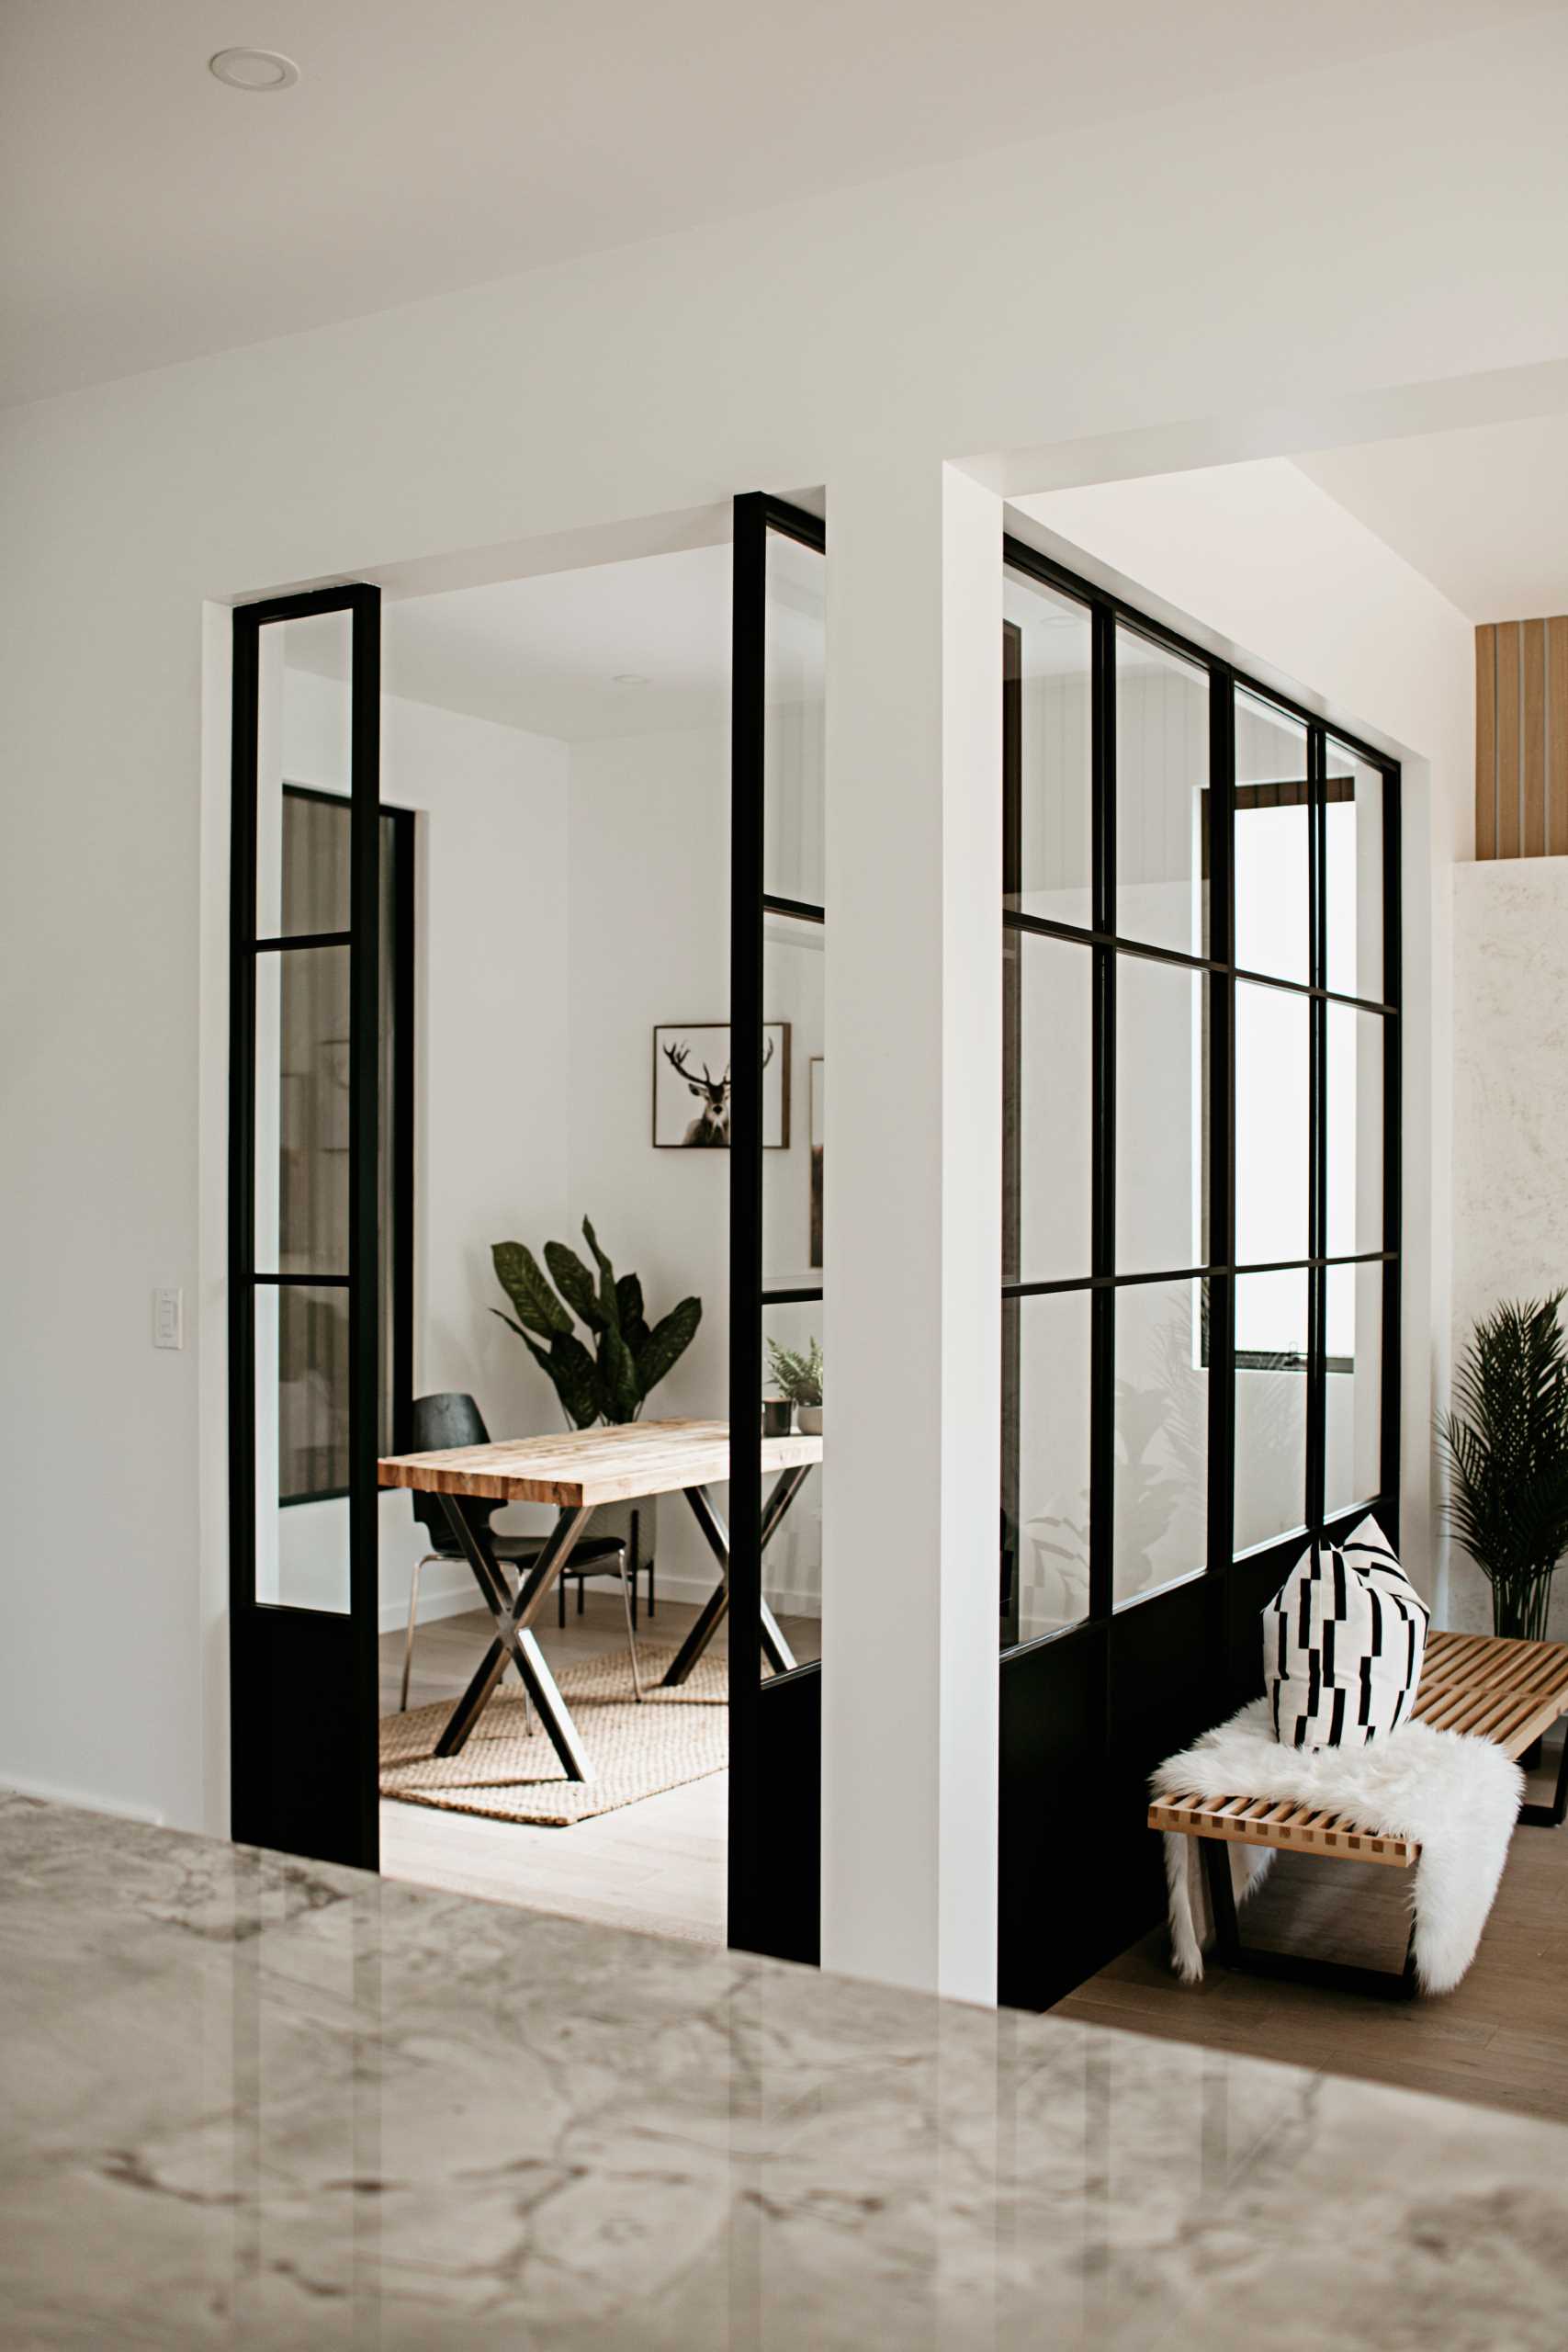 Windows with thick black frames and a pivoting door enclose the home office, and at the same time, complement the black in the kitchen.